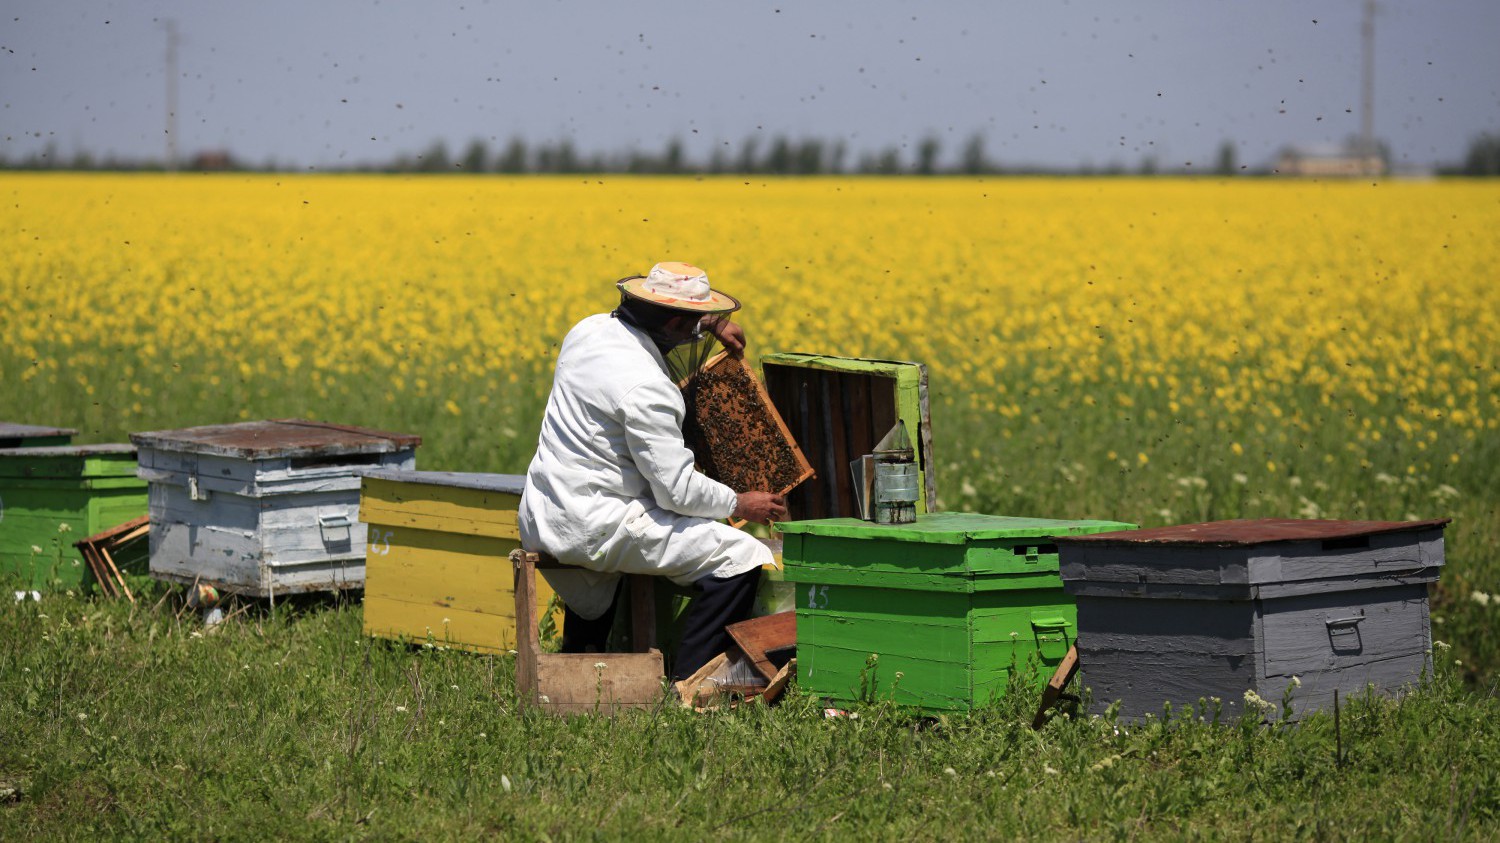 A beekeeper takes care of his hives in a field of rapeseed on the outskirts of Deveselu village